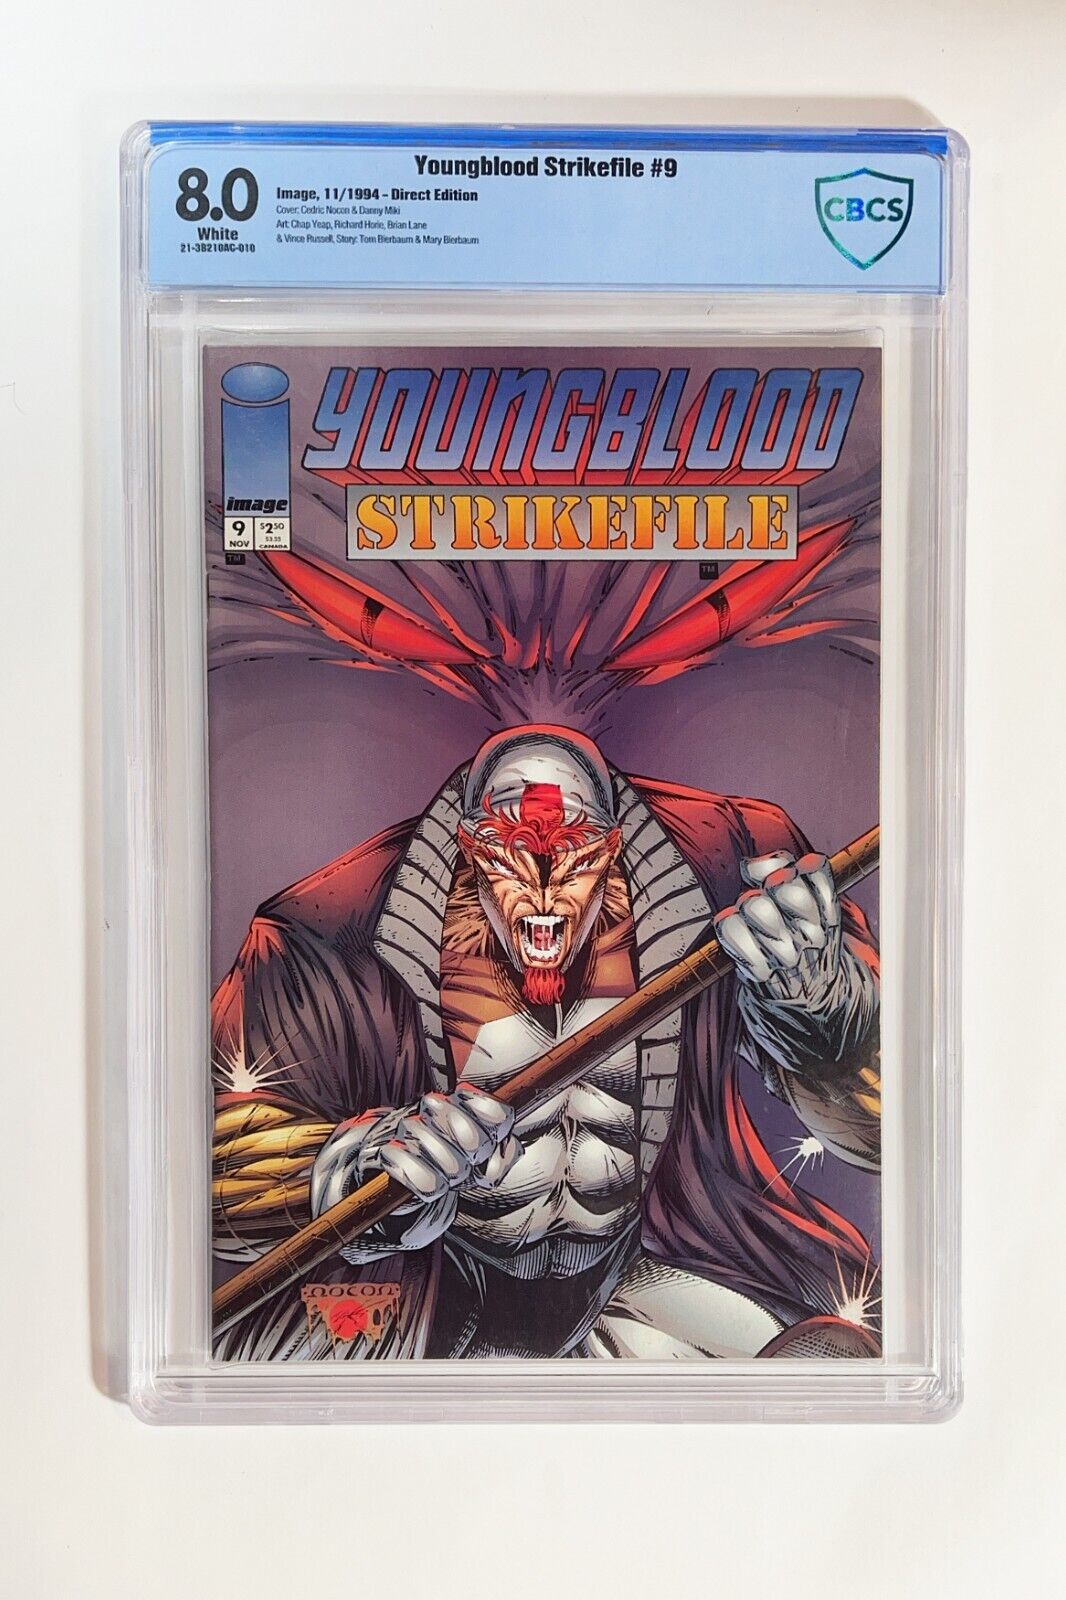 Youngblood Strike File #9 CBCS Graded 8.0 Image November 1994 (NOT CGC)